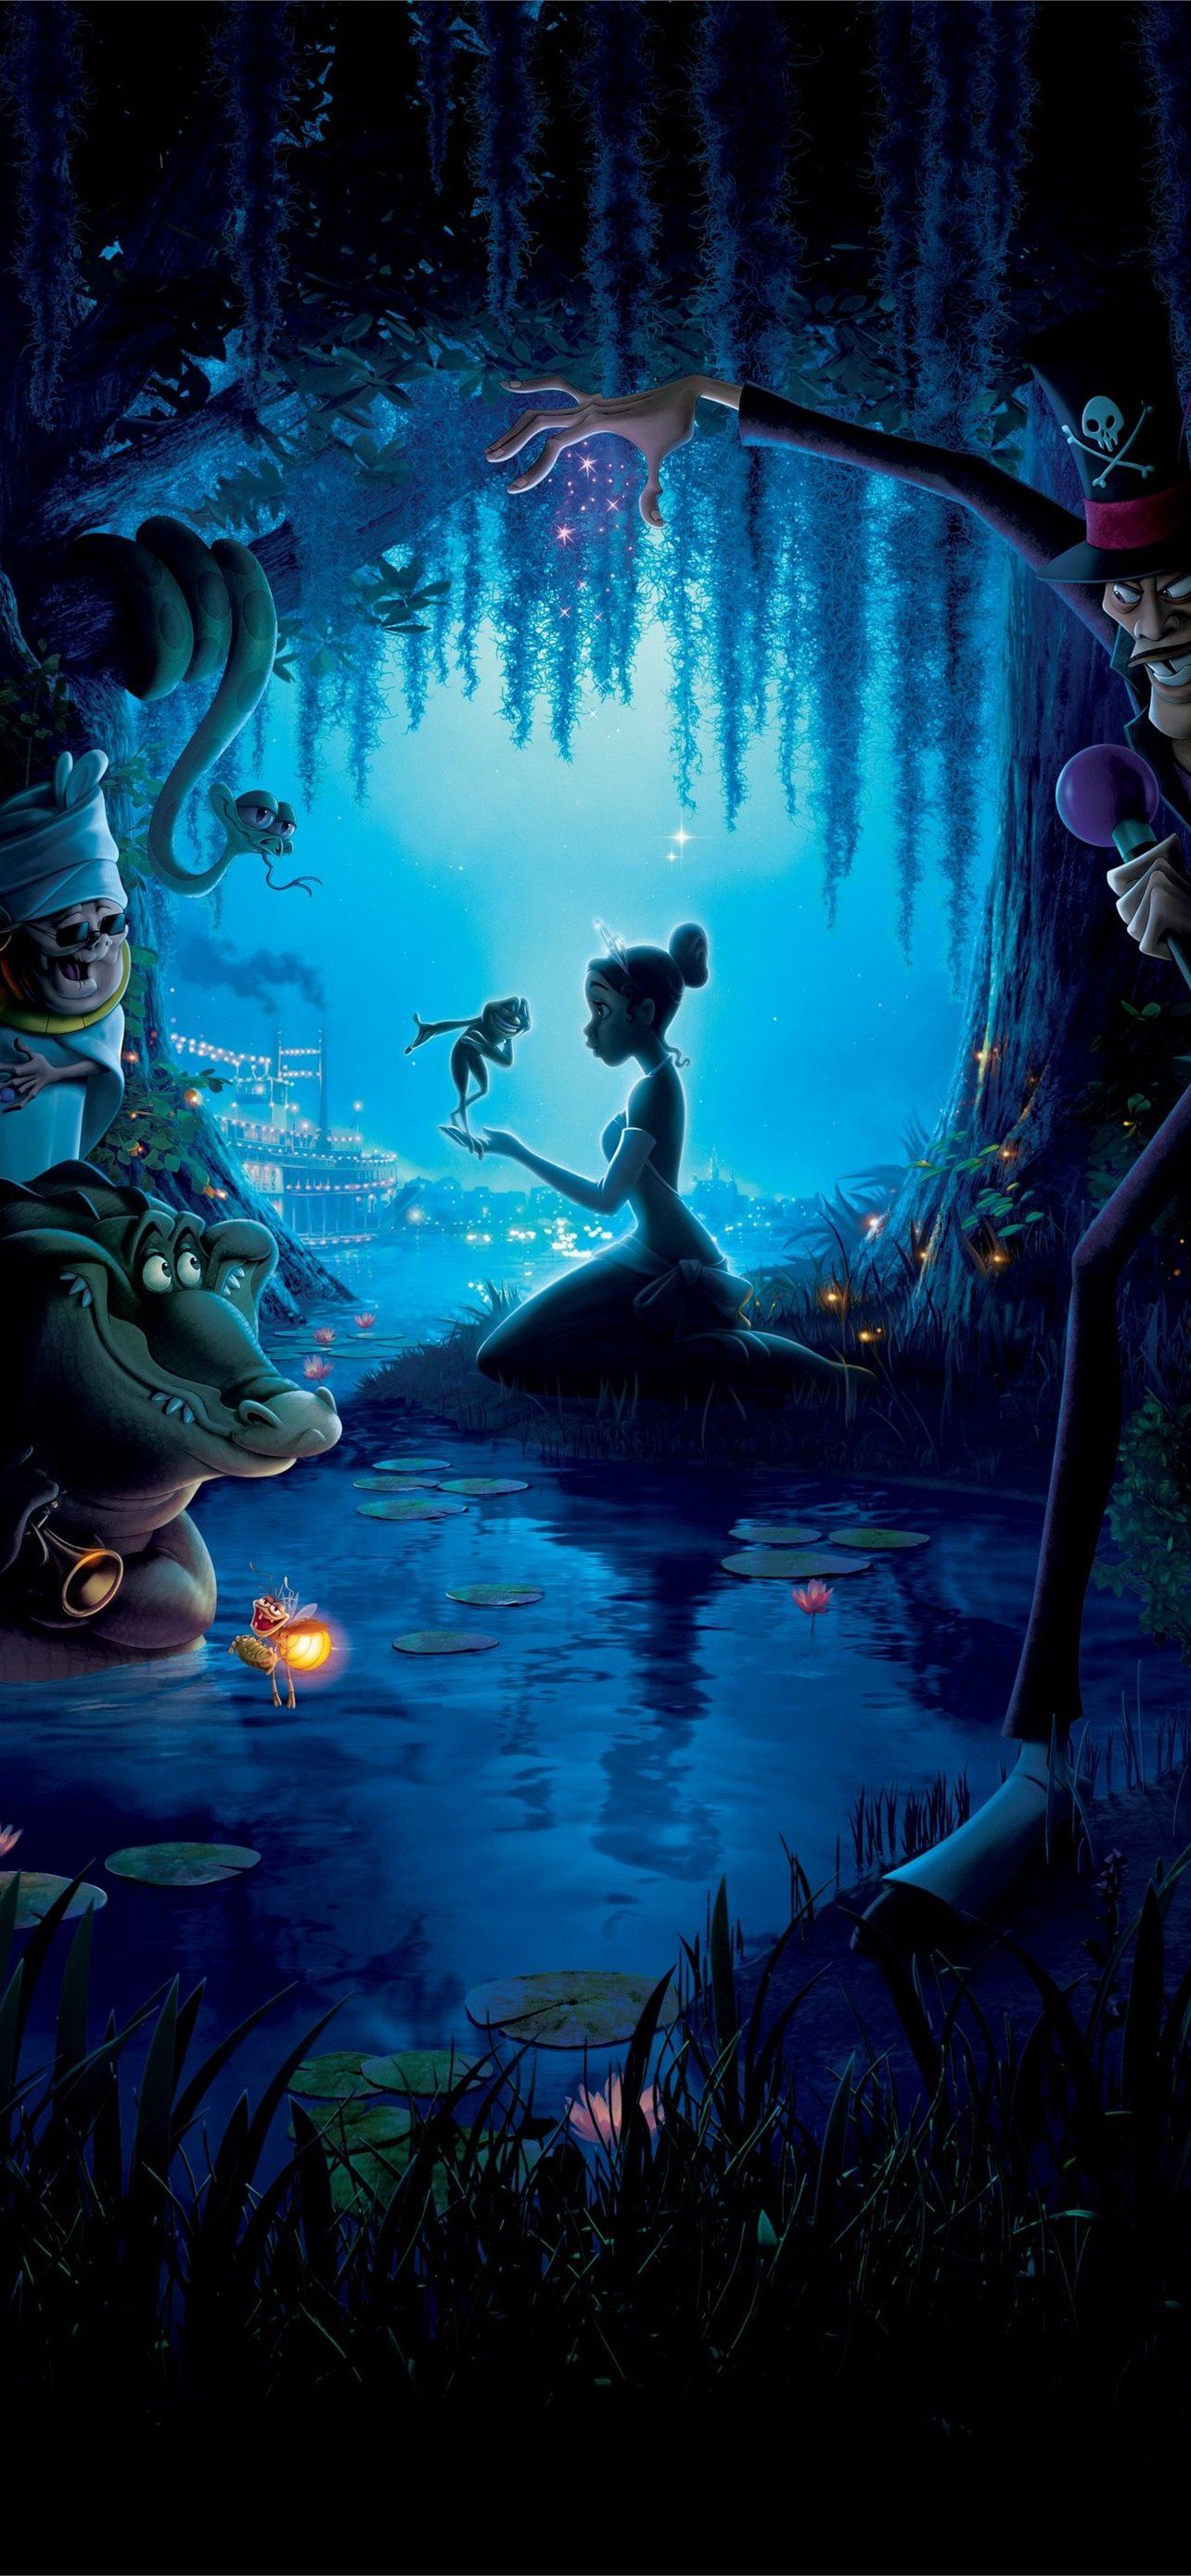 A cartoon of an evil man and woman in the water - Disney